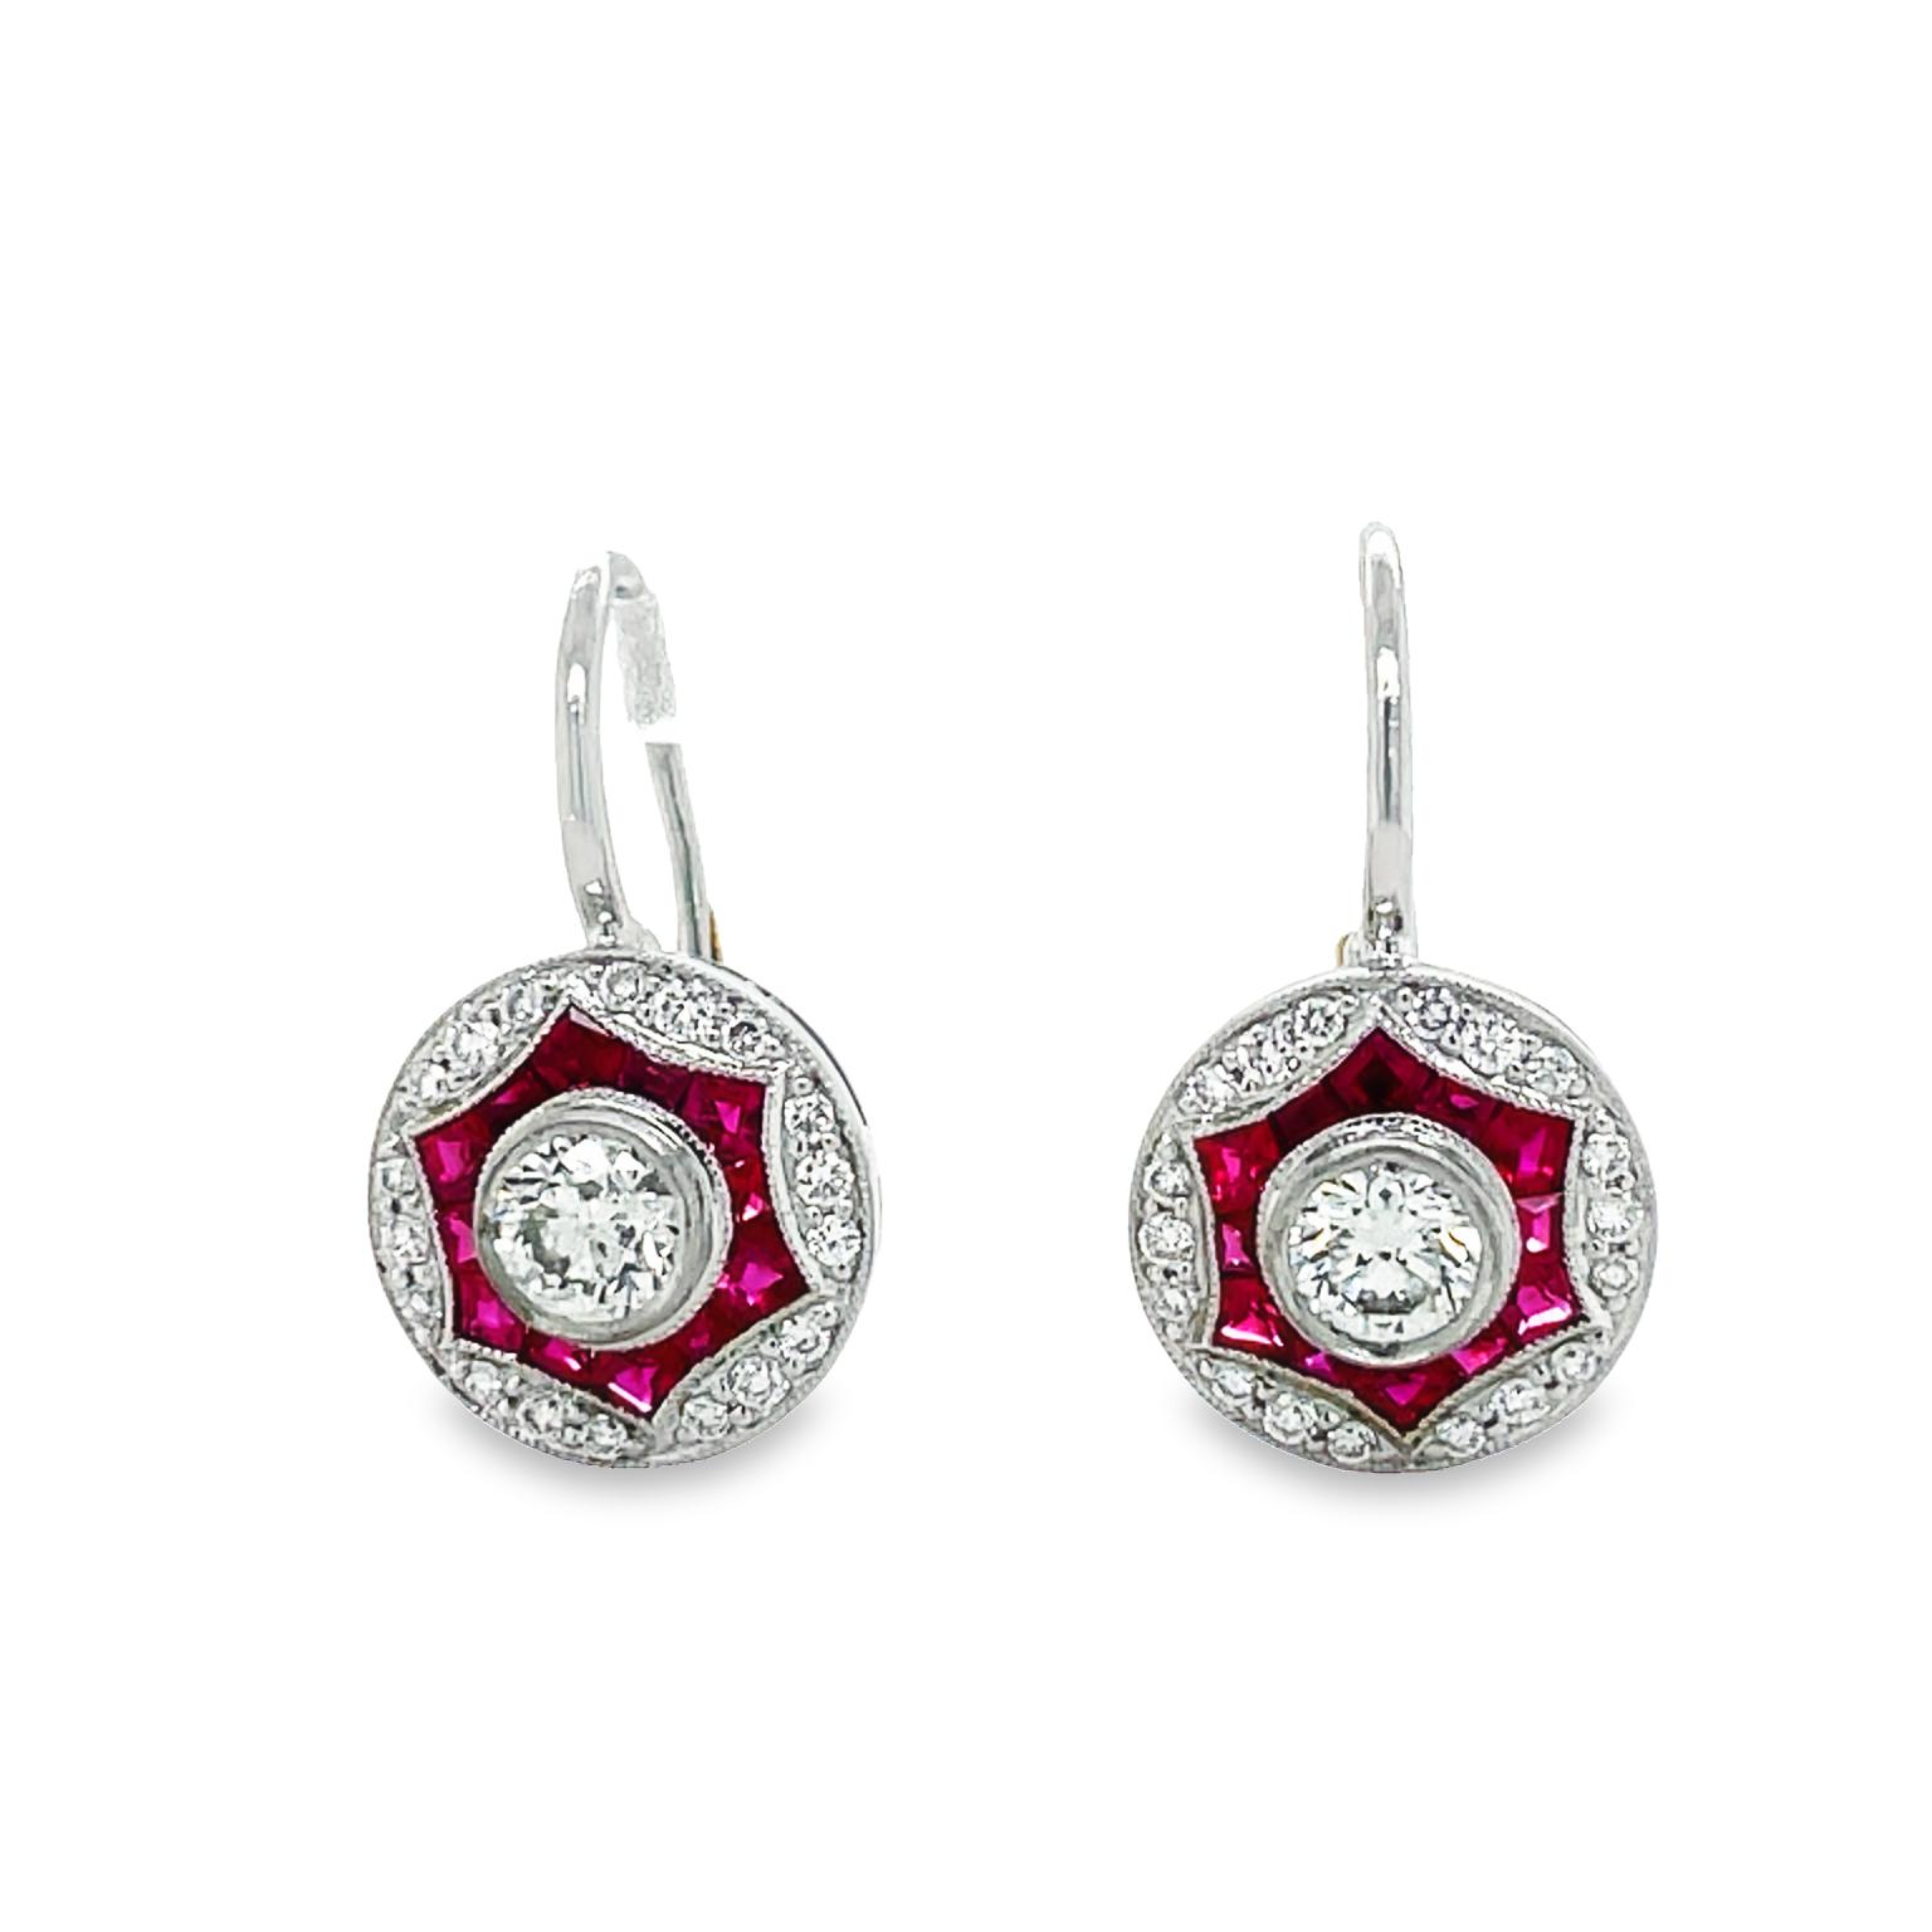 Art deco style dangling earrings   Two round diamonds 0.59 cts  Round diamonds 0.26 cts  Baguette rubies 0.64 cts   Set in platinum.  Secure hinged system